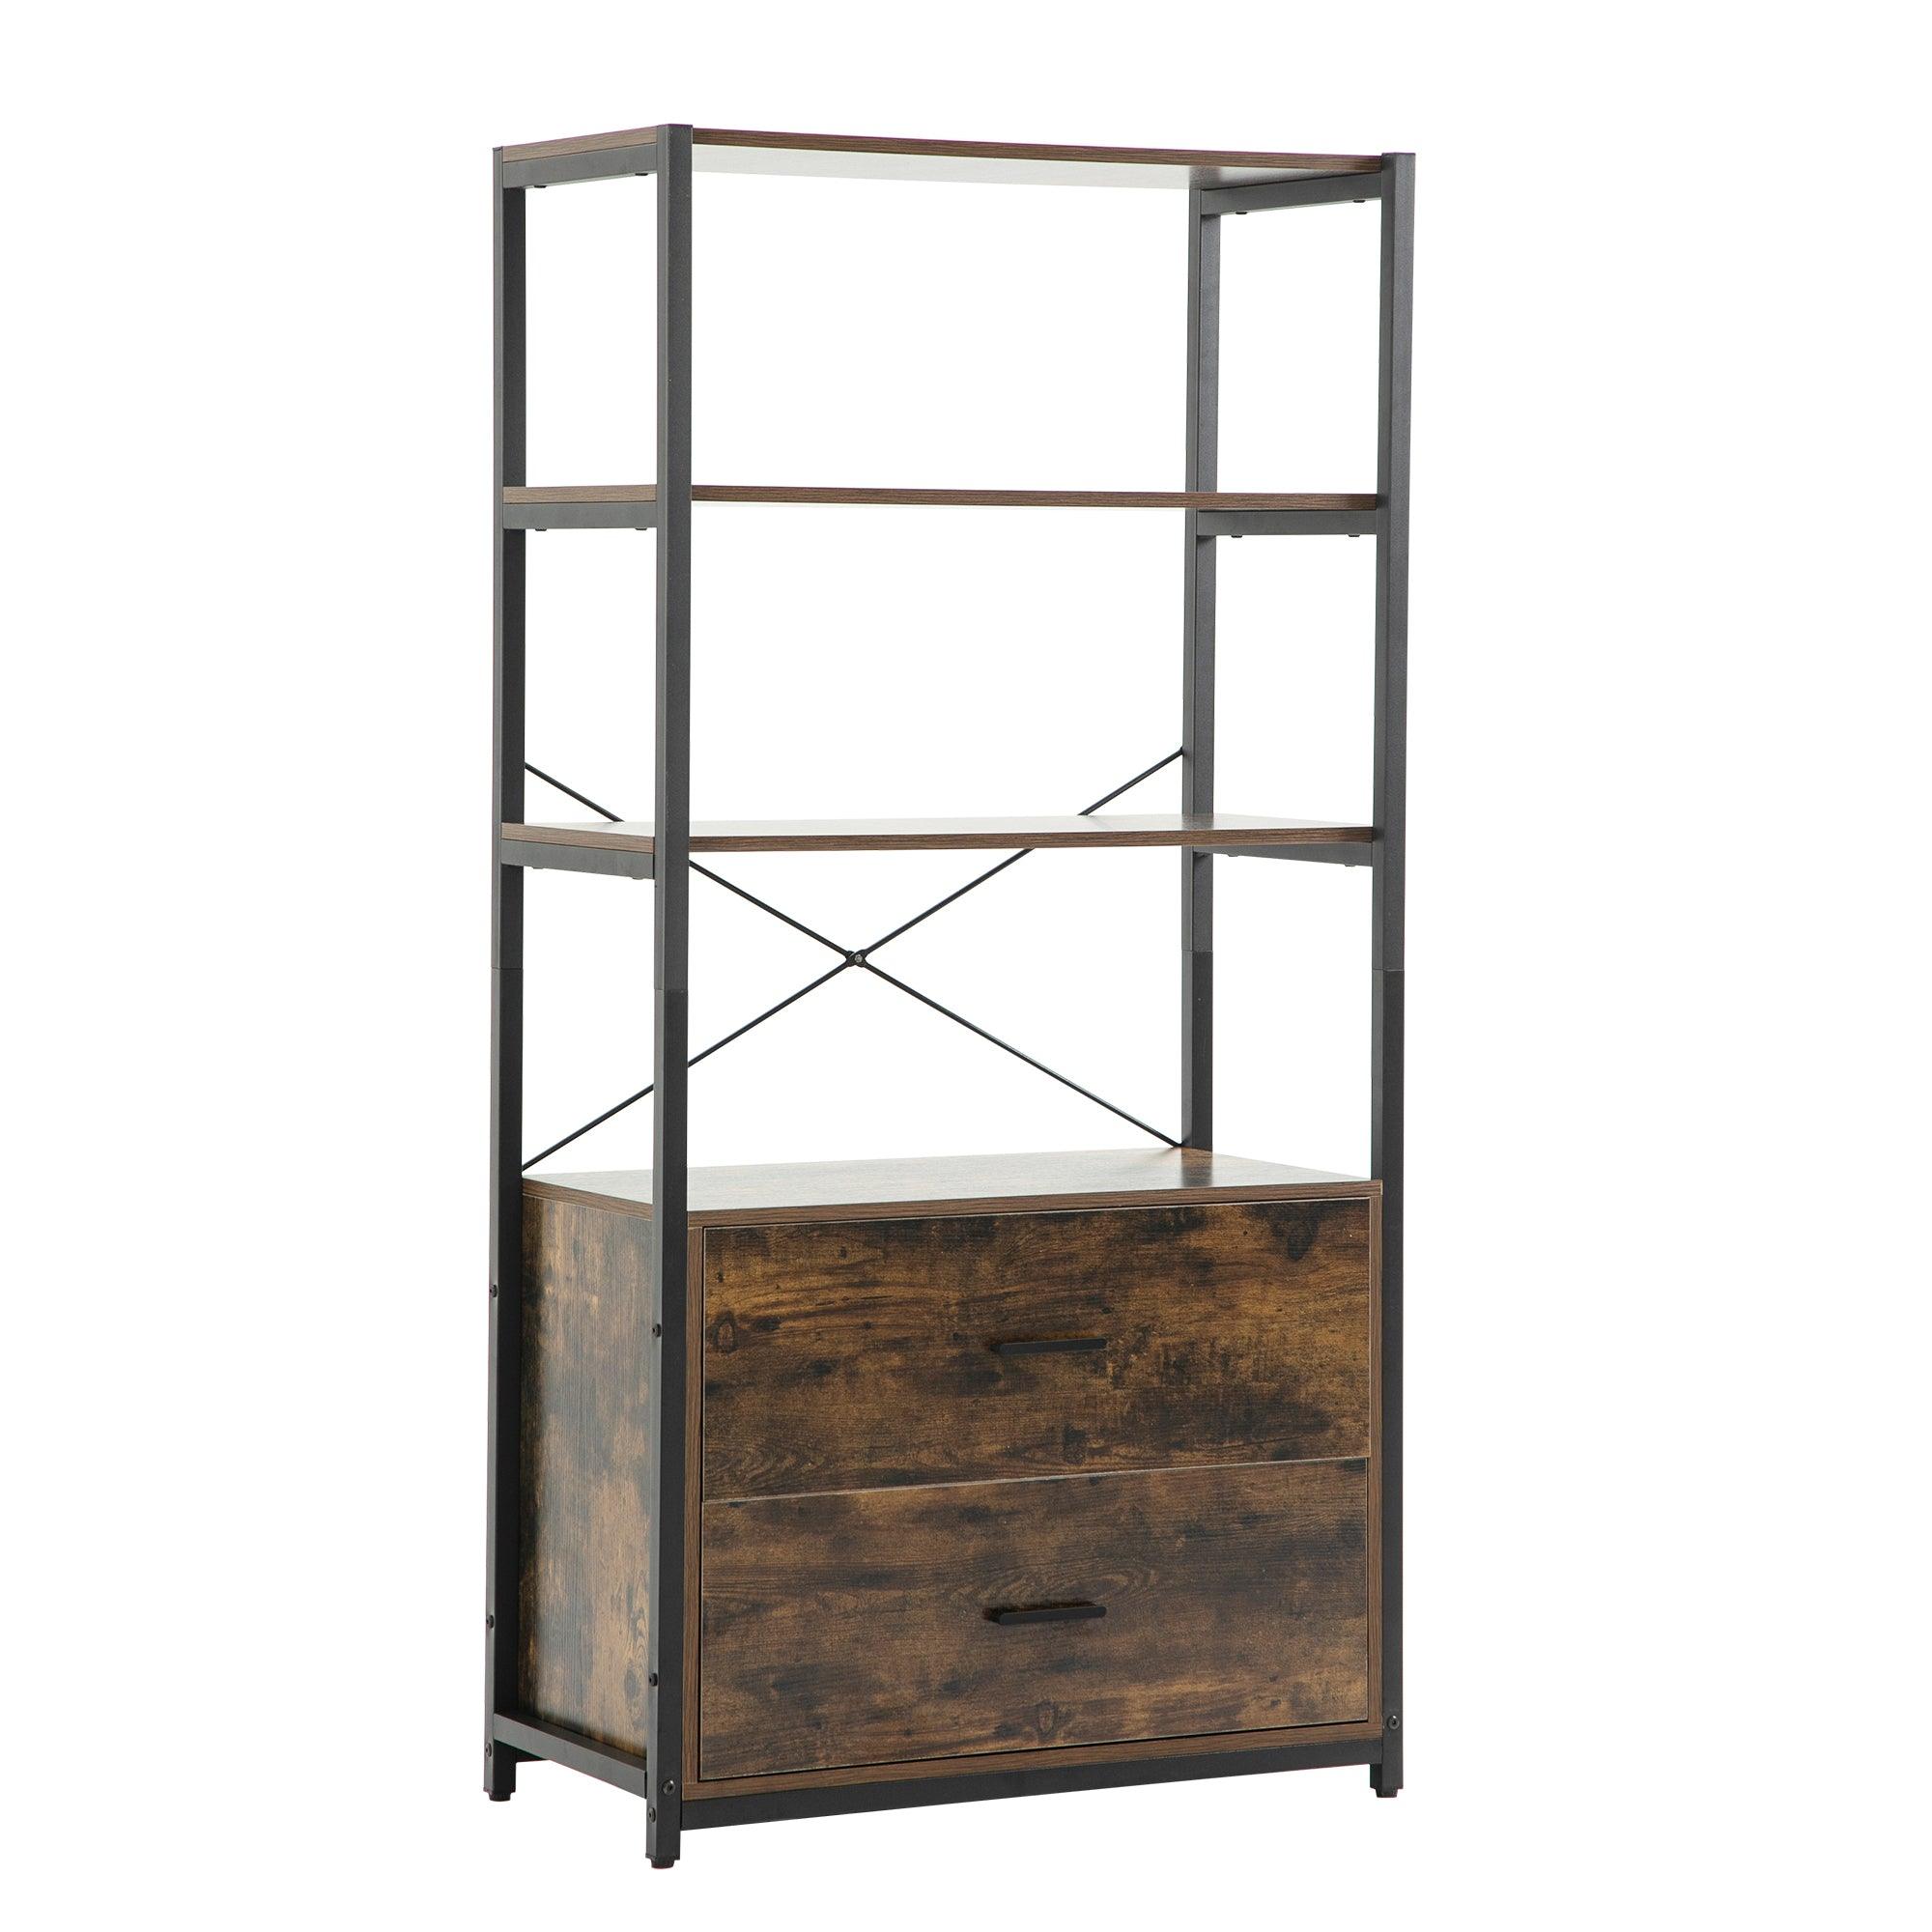 🆓🚛 Industrial Bookcase With File Cabinet Drawers, 62.7 in Tall Bookshelf 4 Tier, Freestanding Storage Home Office Cabinet Organizer, Rustic Home Decor, Vintage Brown